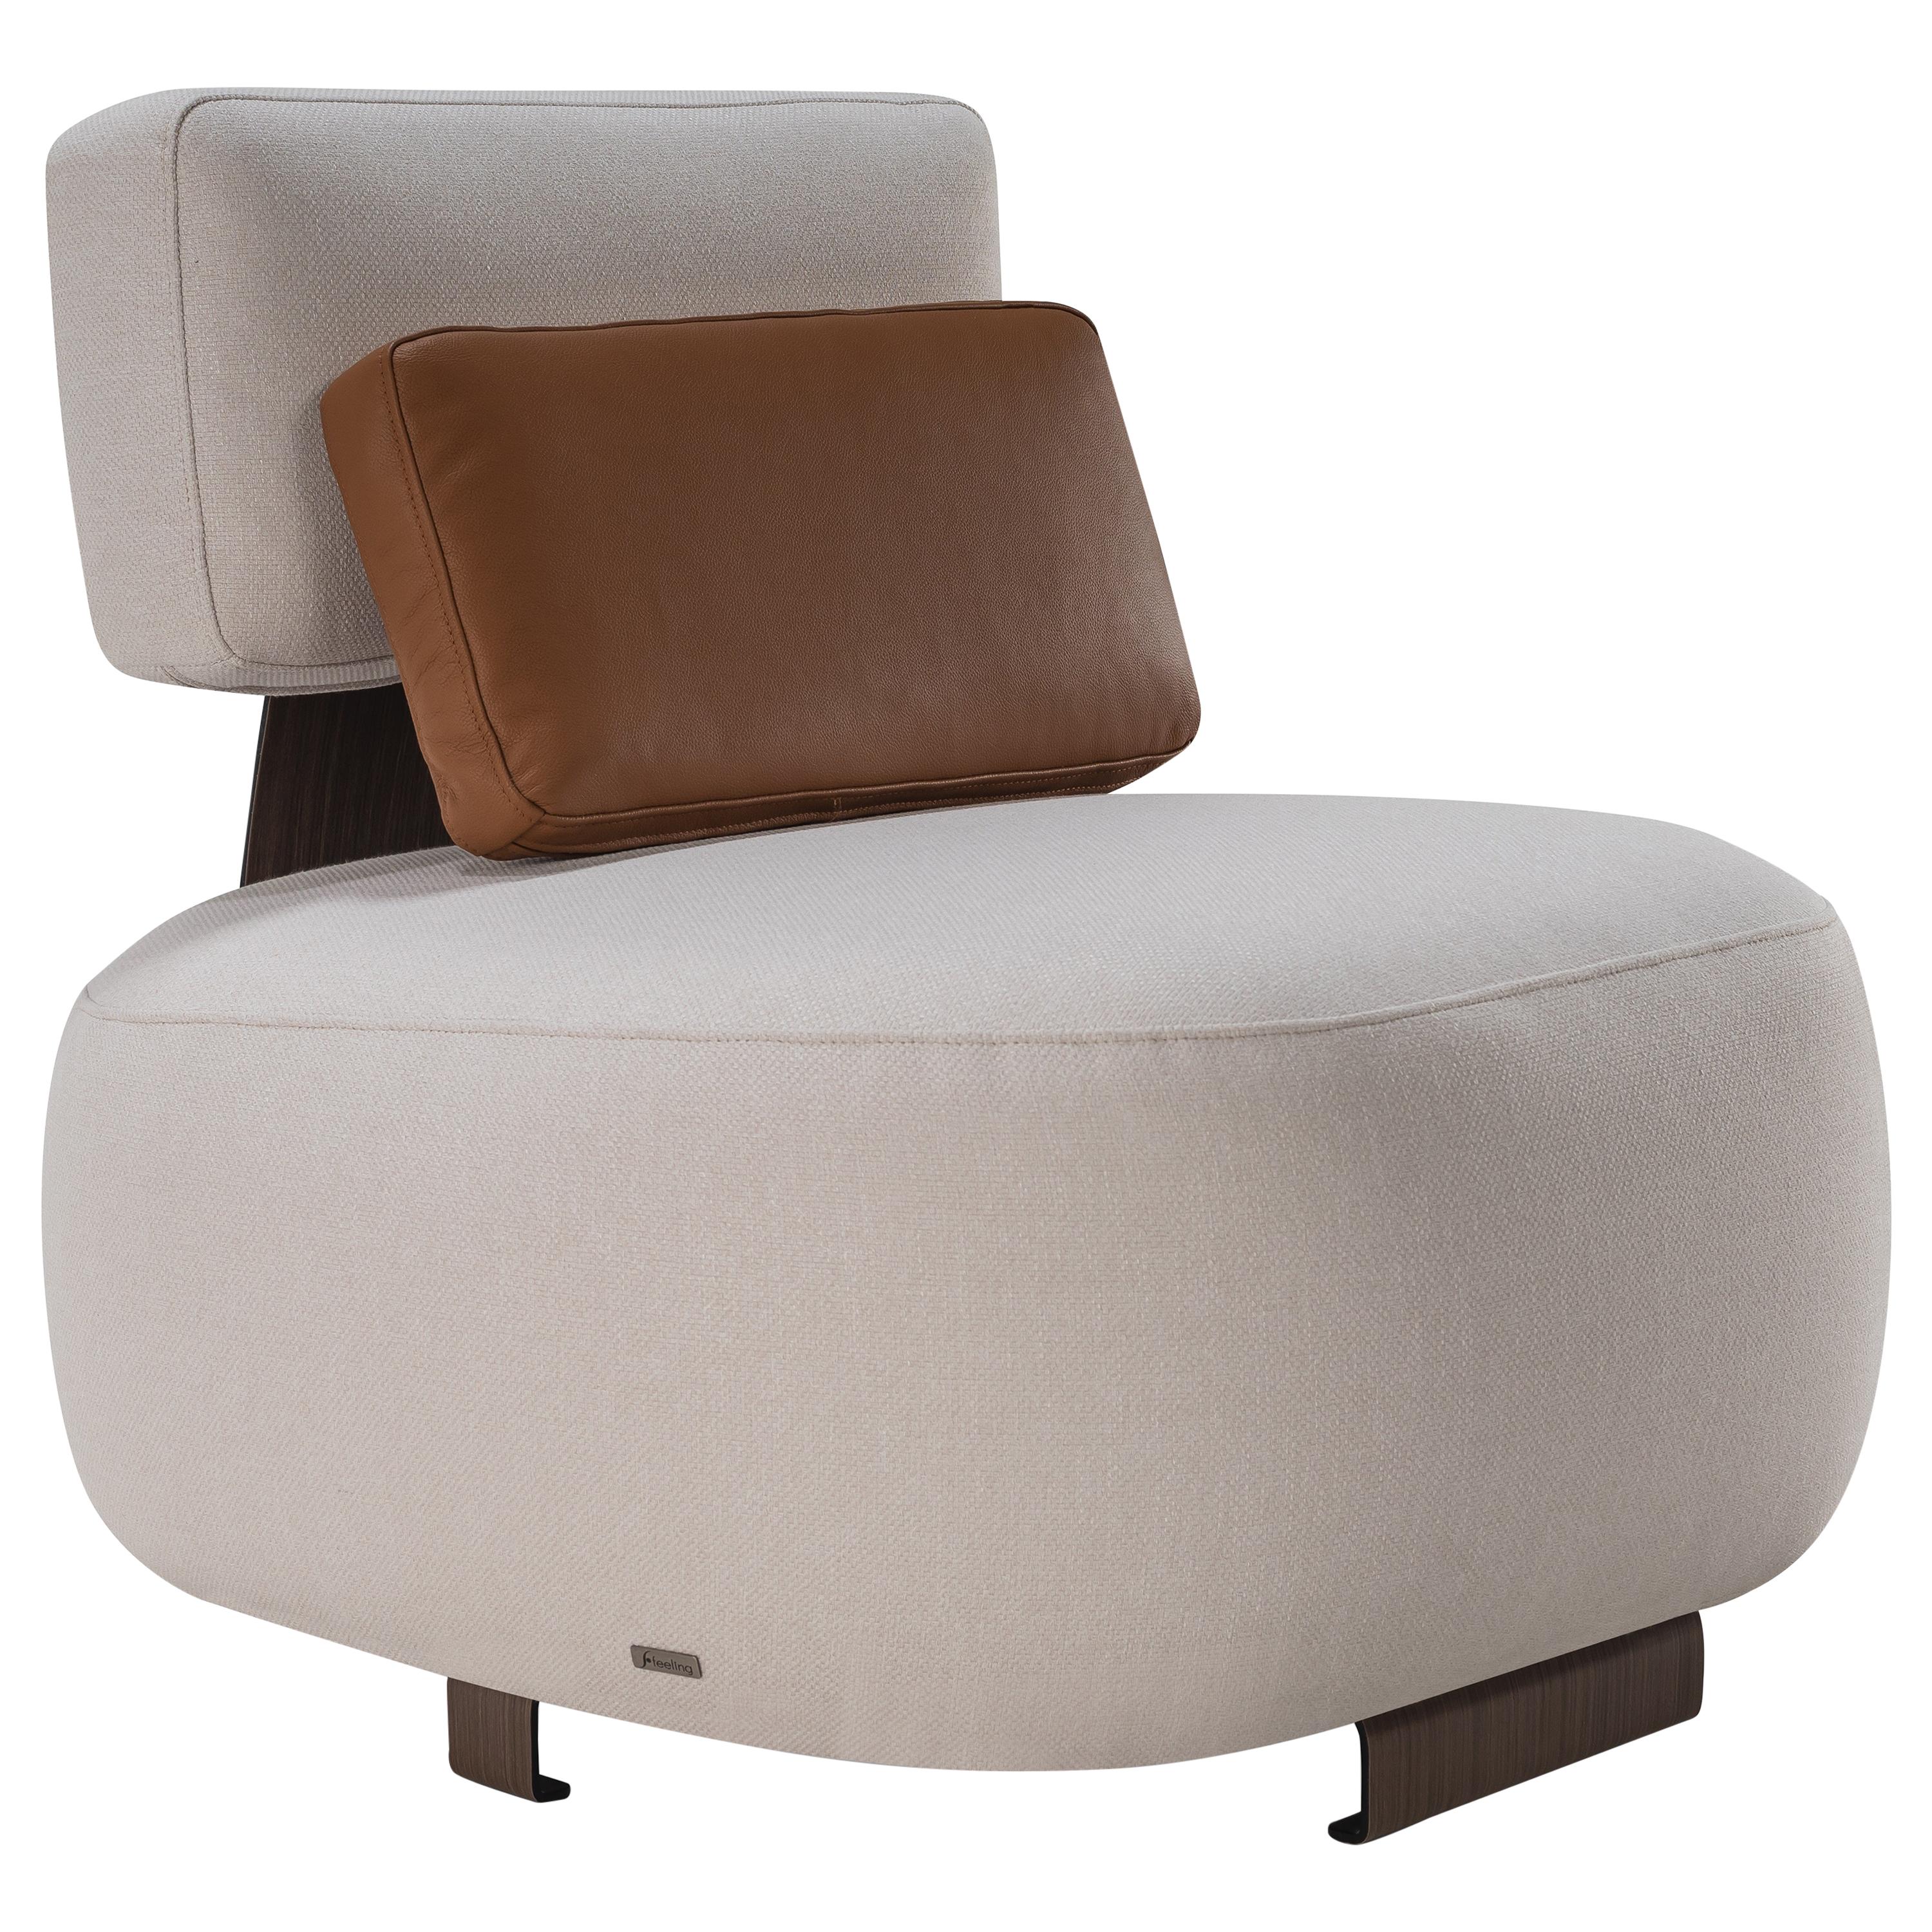 Armchair Winding Fixed, Color Off-White and Kidney Pillow Caramel